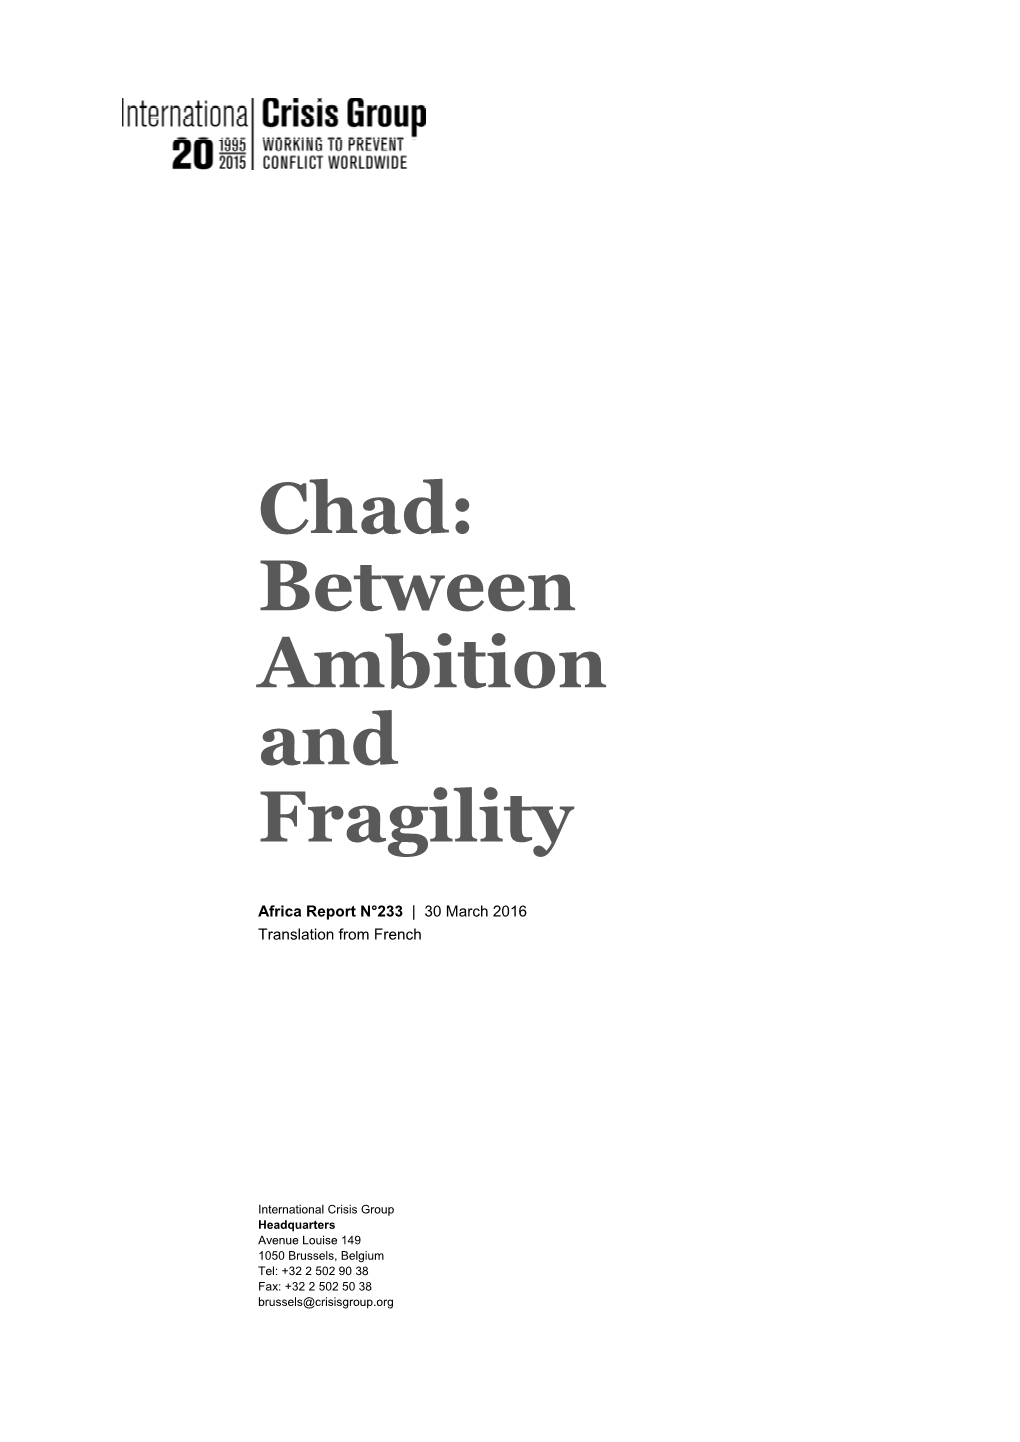 Chad Between Ambition and Fragility.Docx